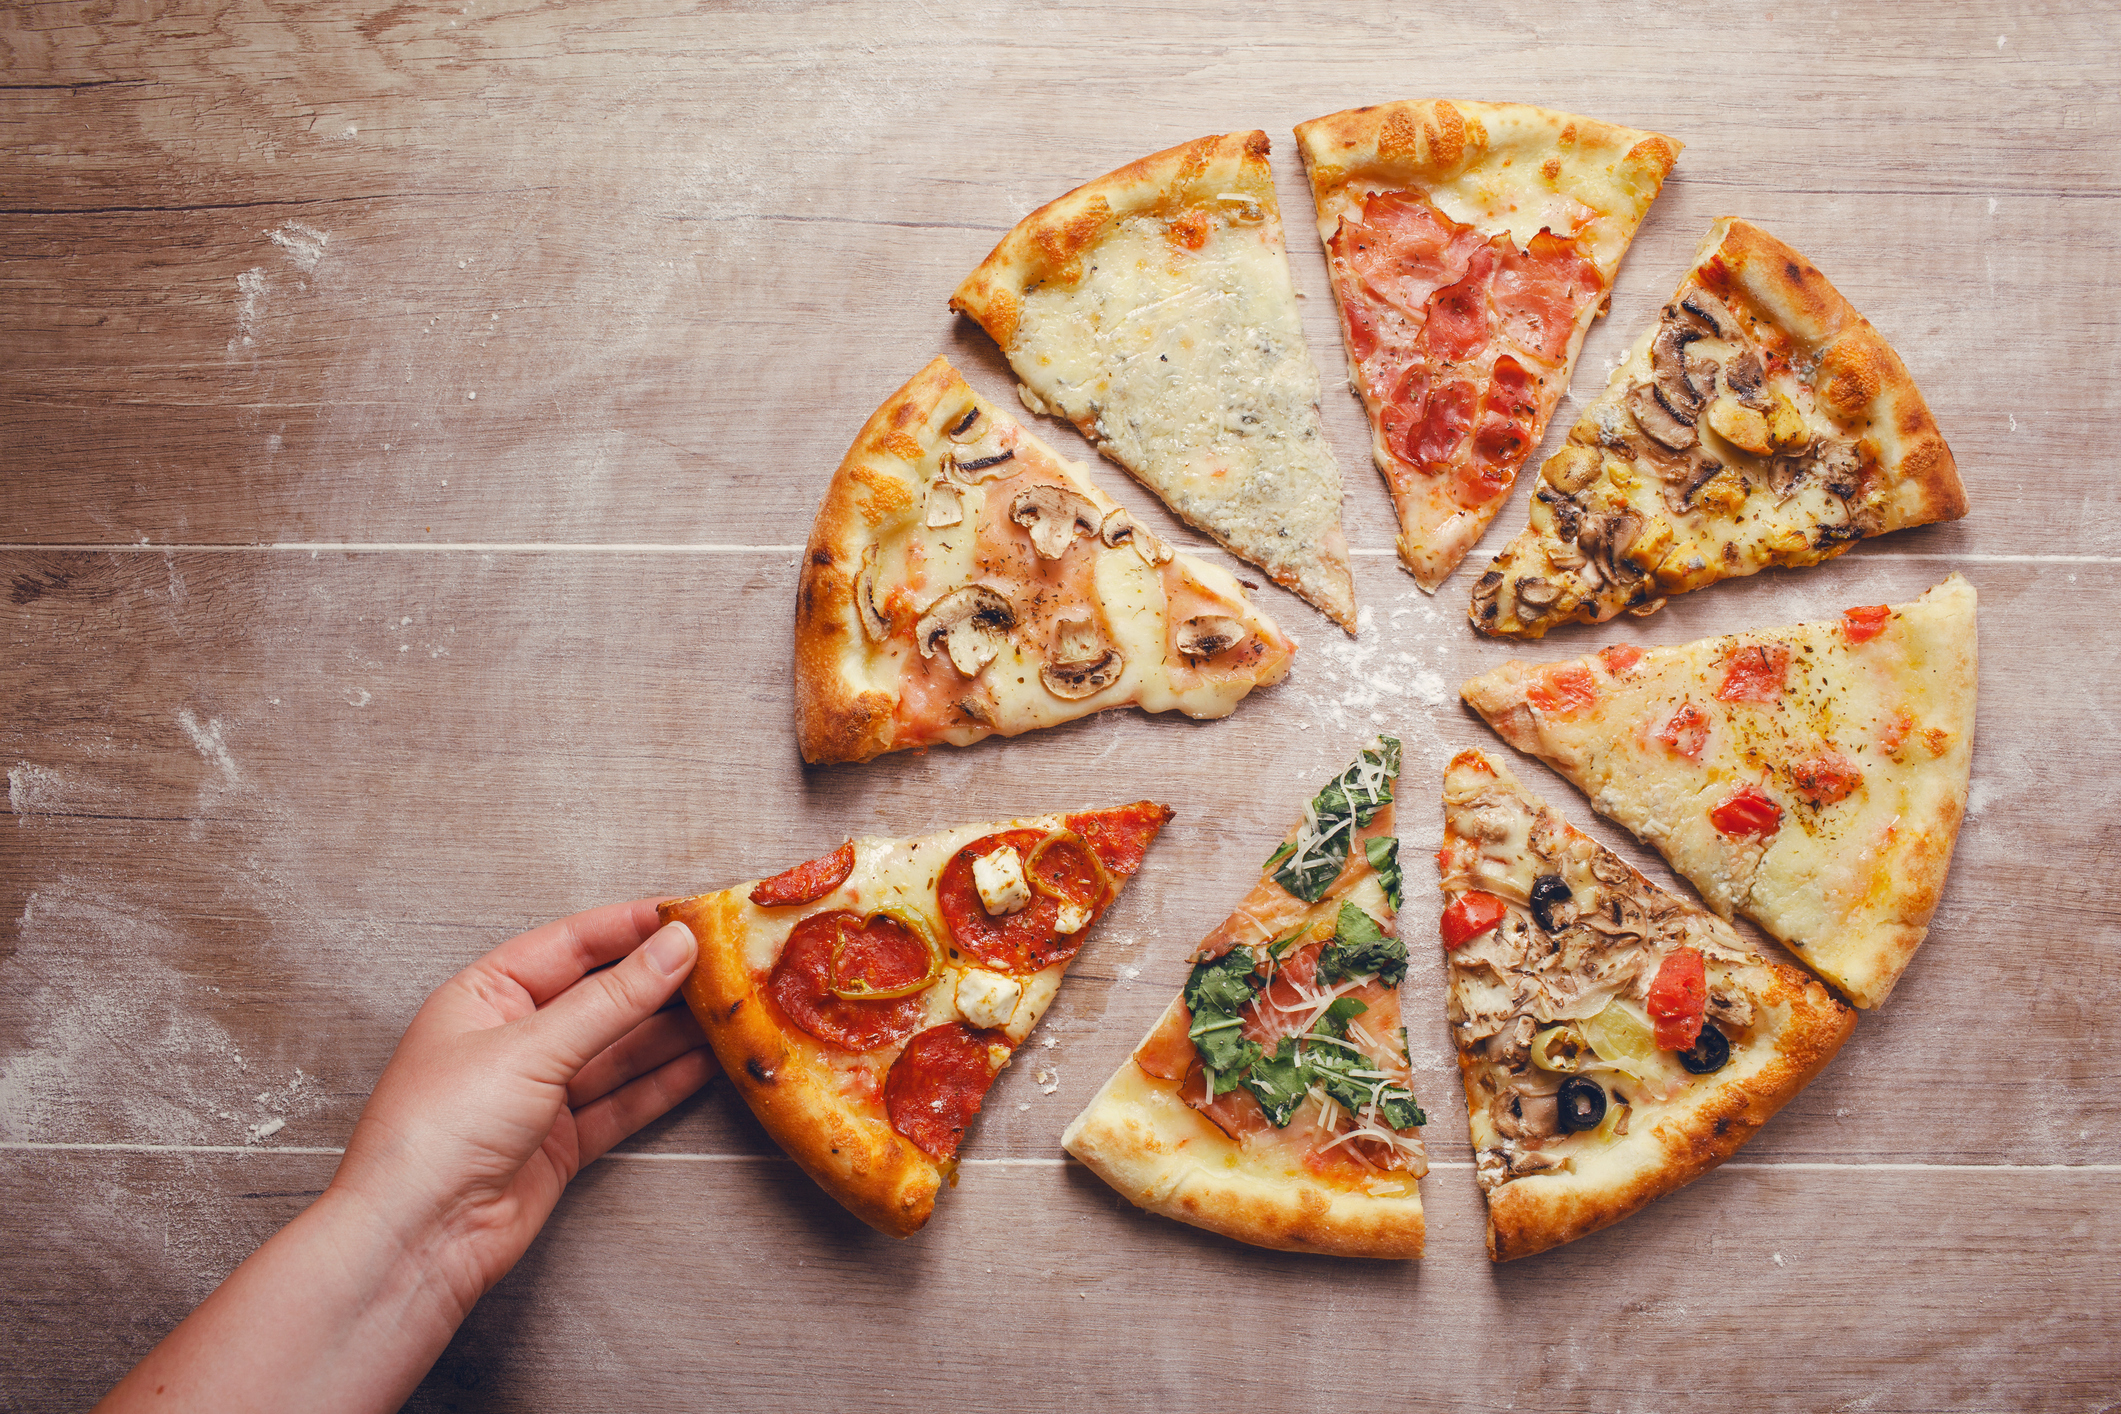 Hand taking slice of pizza with different toppings on a wooden background (Thinkstock/PA)